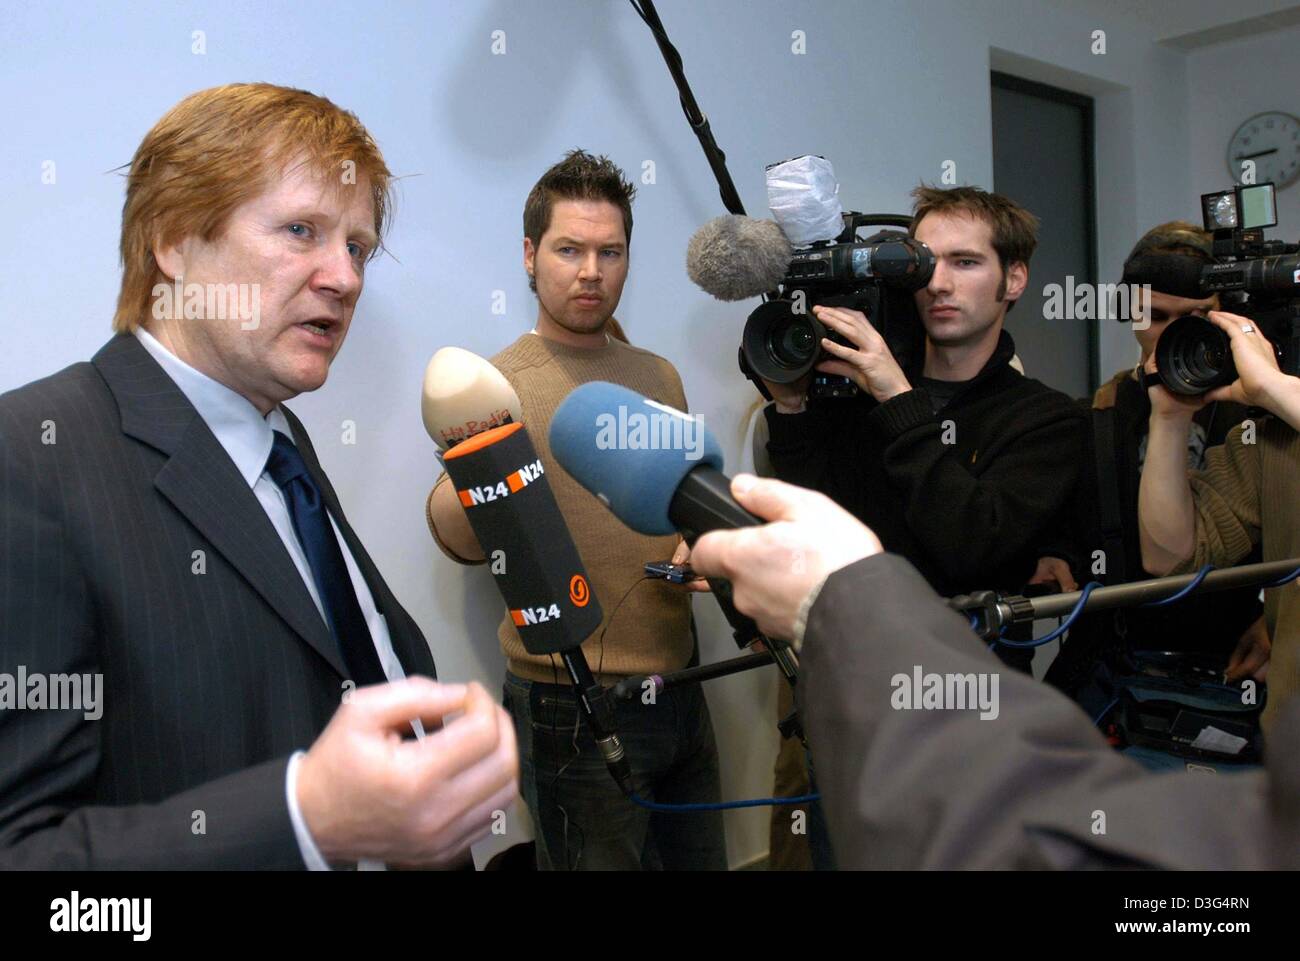 (dpa) - Harald Ermel, the defense attorney of the self-declared cannibal Armin Meiwes gives interviews at the district court in Kassel, Germany, 12 December 2003. The German murder trial of the 42-year-old German computer specialist Armin Meiwes will hear evidence on 12 December of the effects of alcohol and medication on his victim. A toxicologist will give testimony on the third  Stock Photo